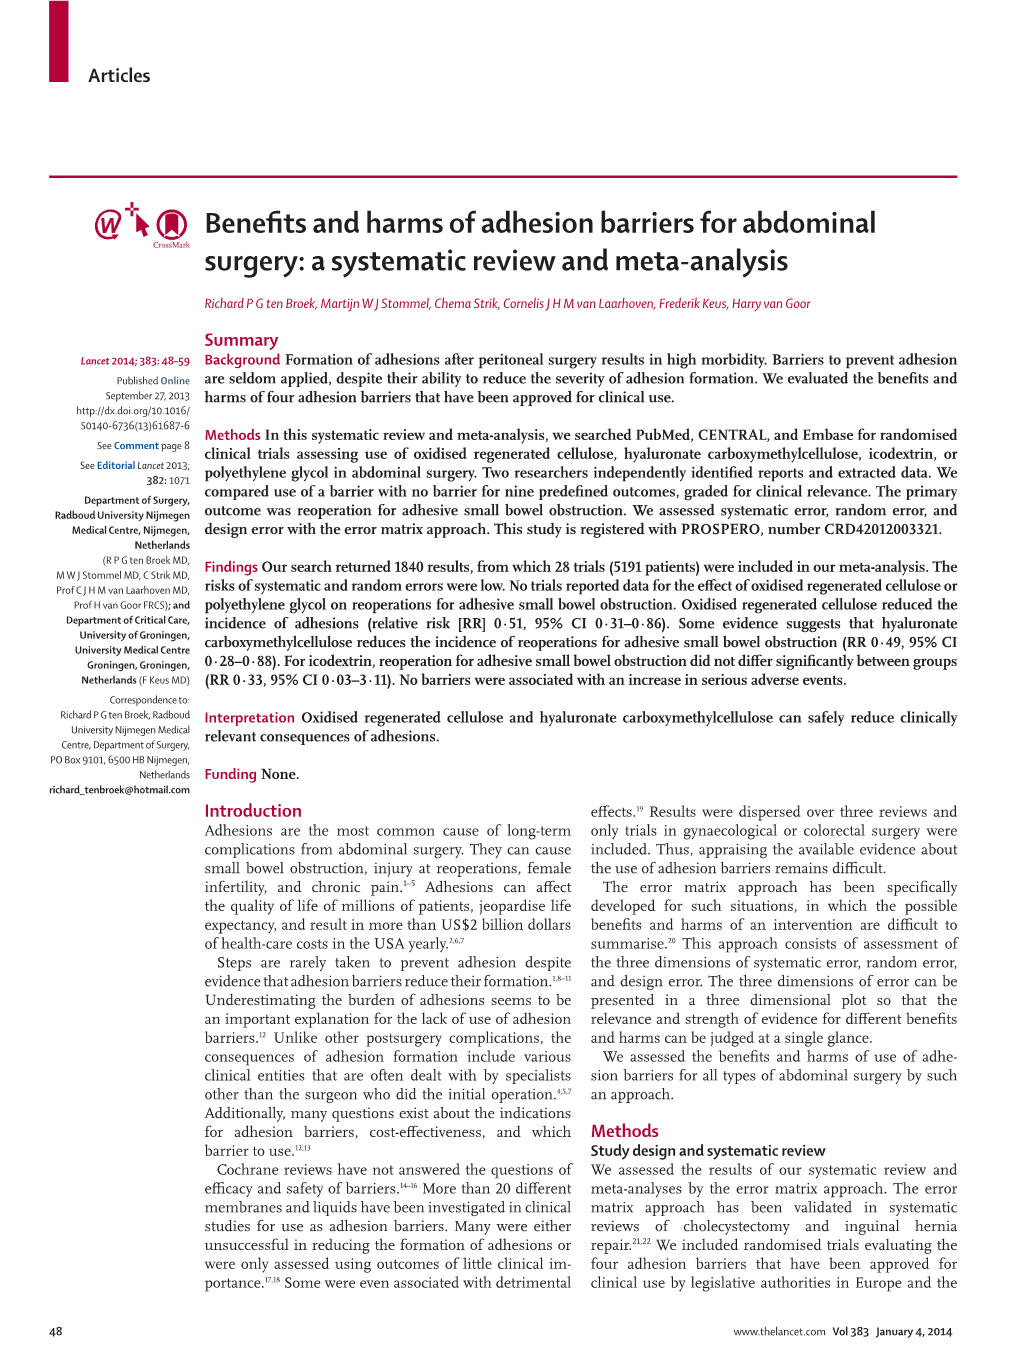 Benefits and Harms of Adhesion Barriers for Abdominal Surgery: A